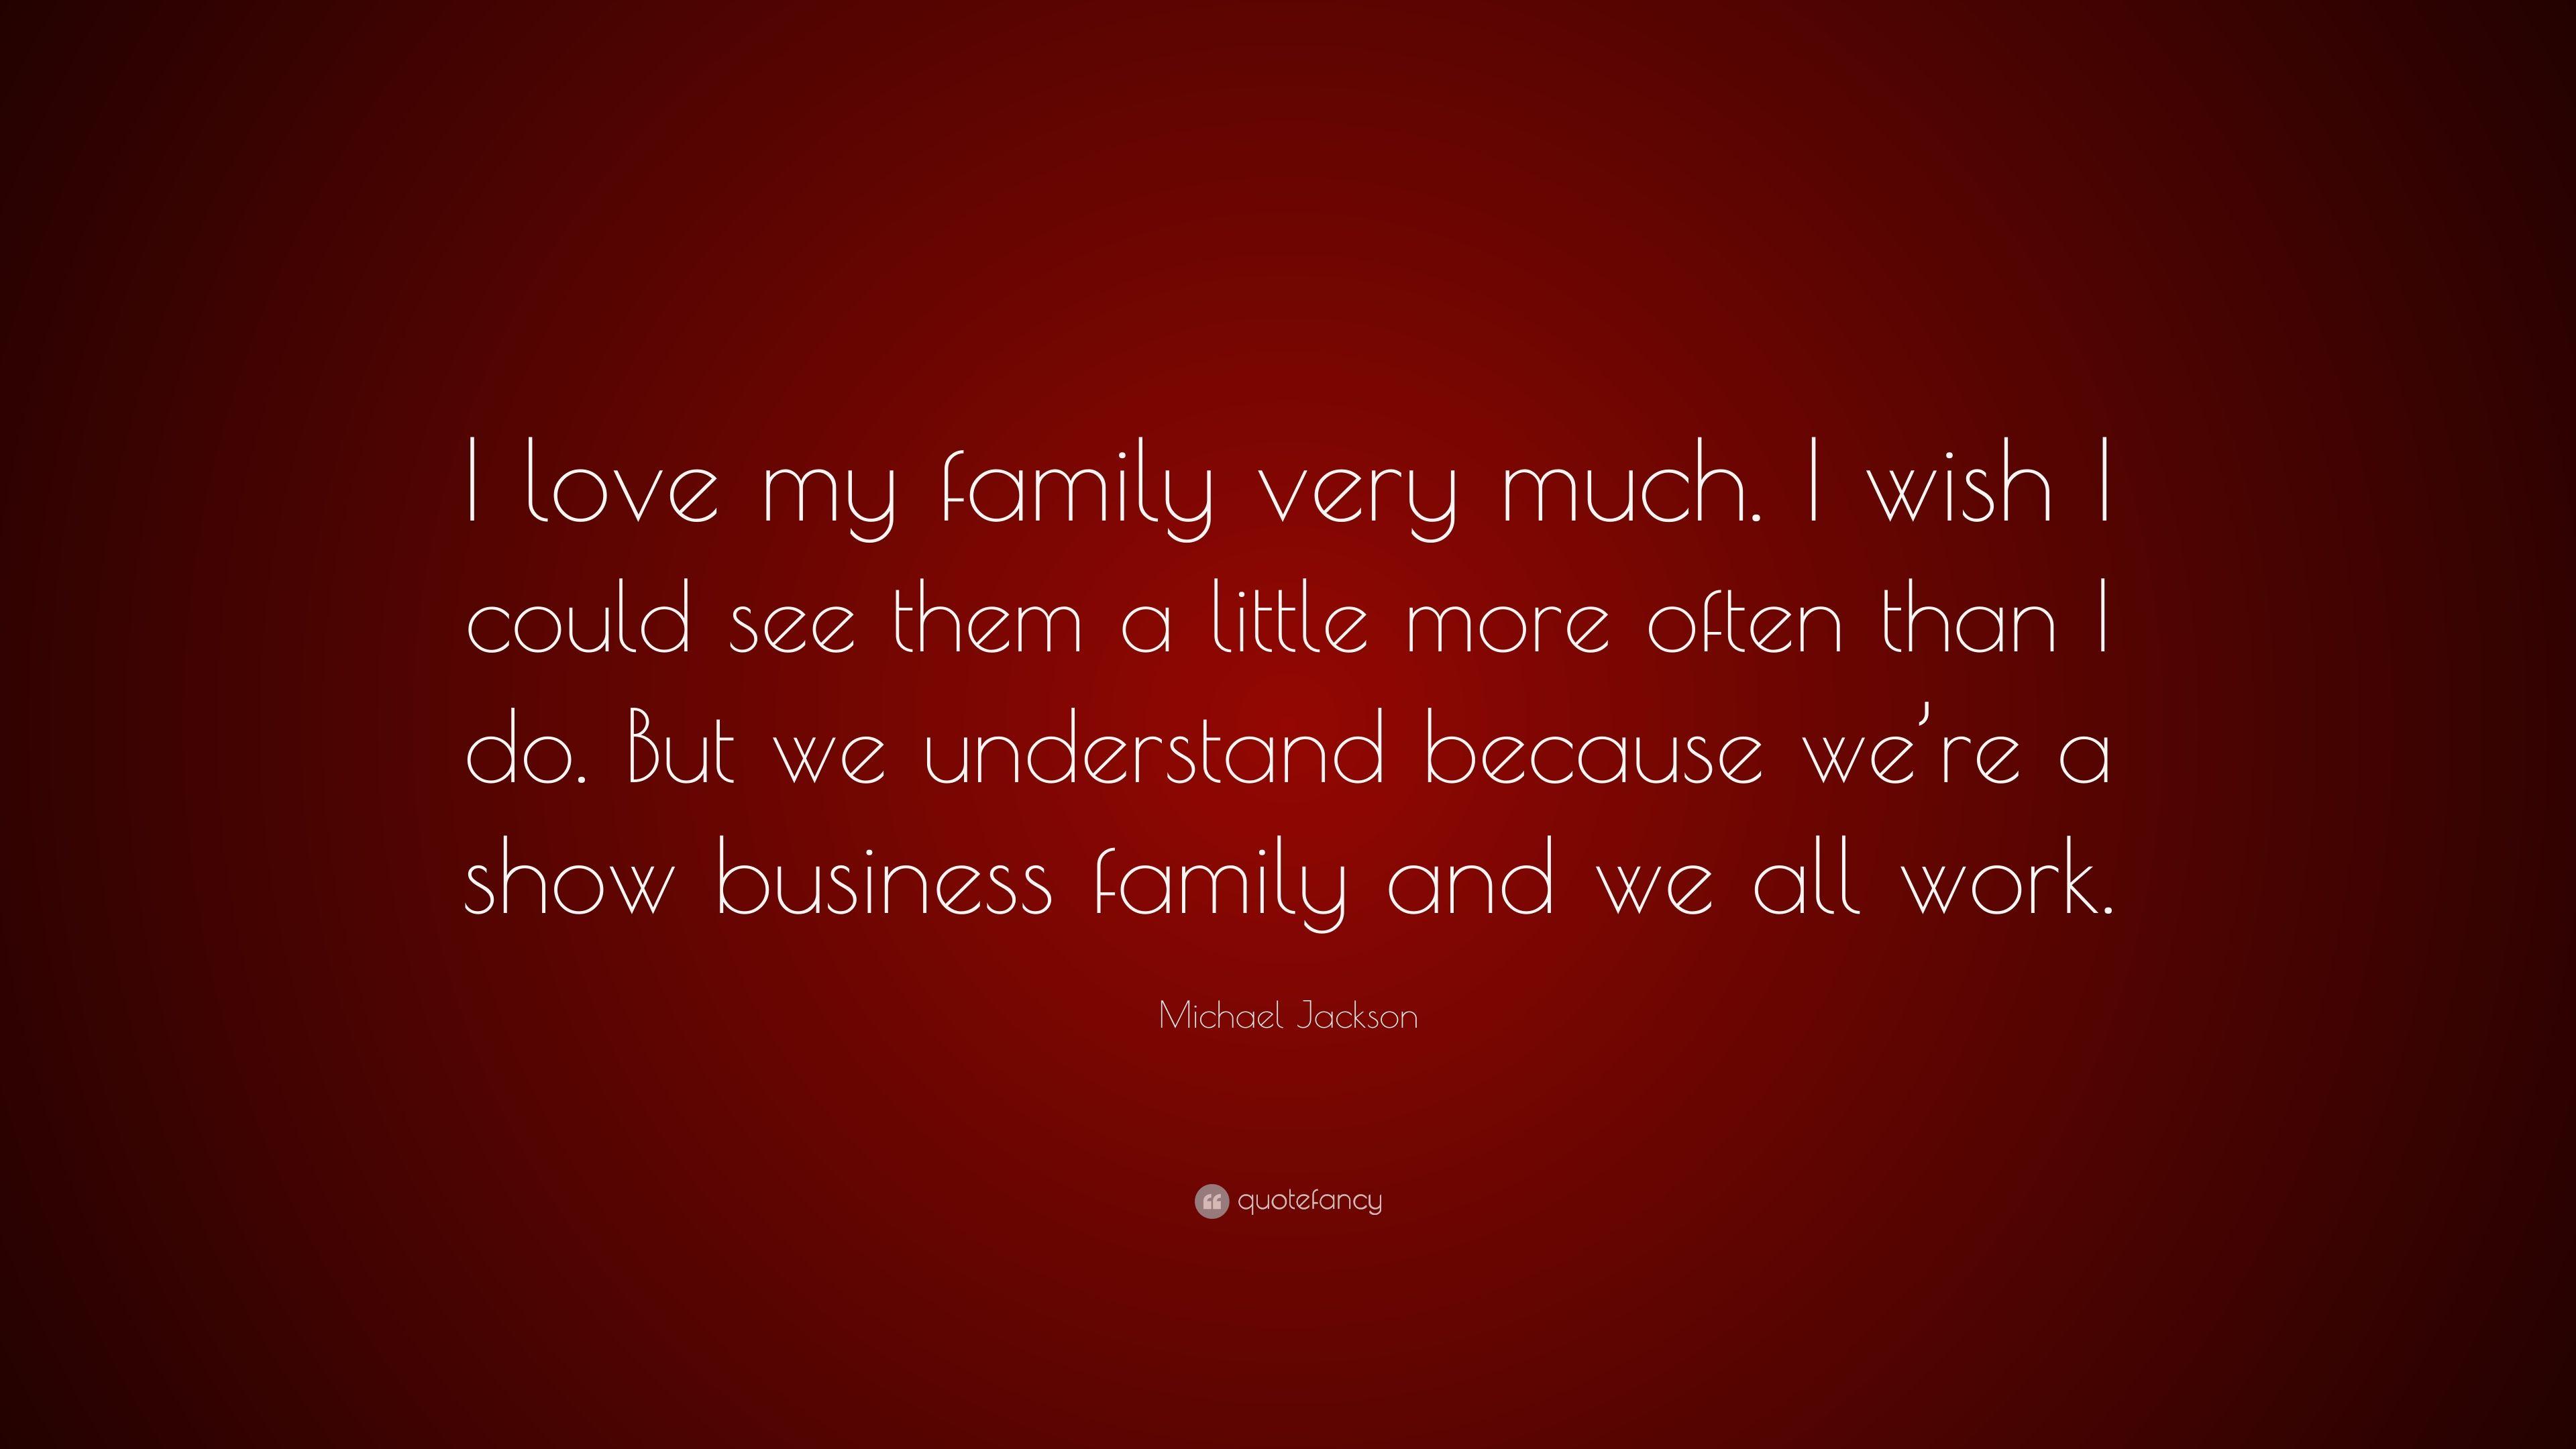 Michael Jackson Quote: “I love my family very much. I wish I could